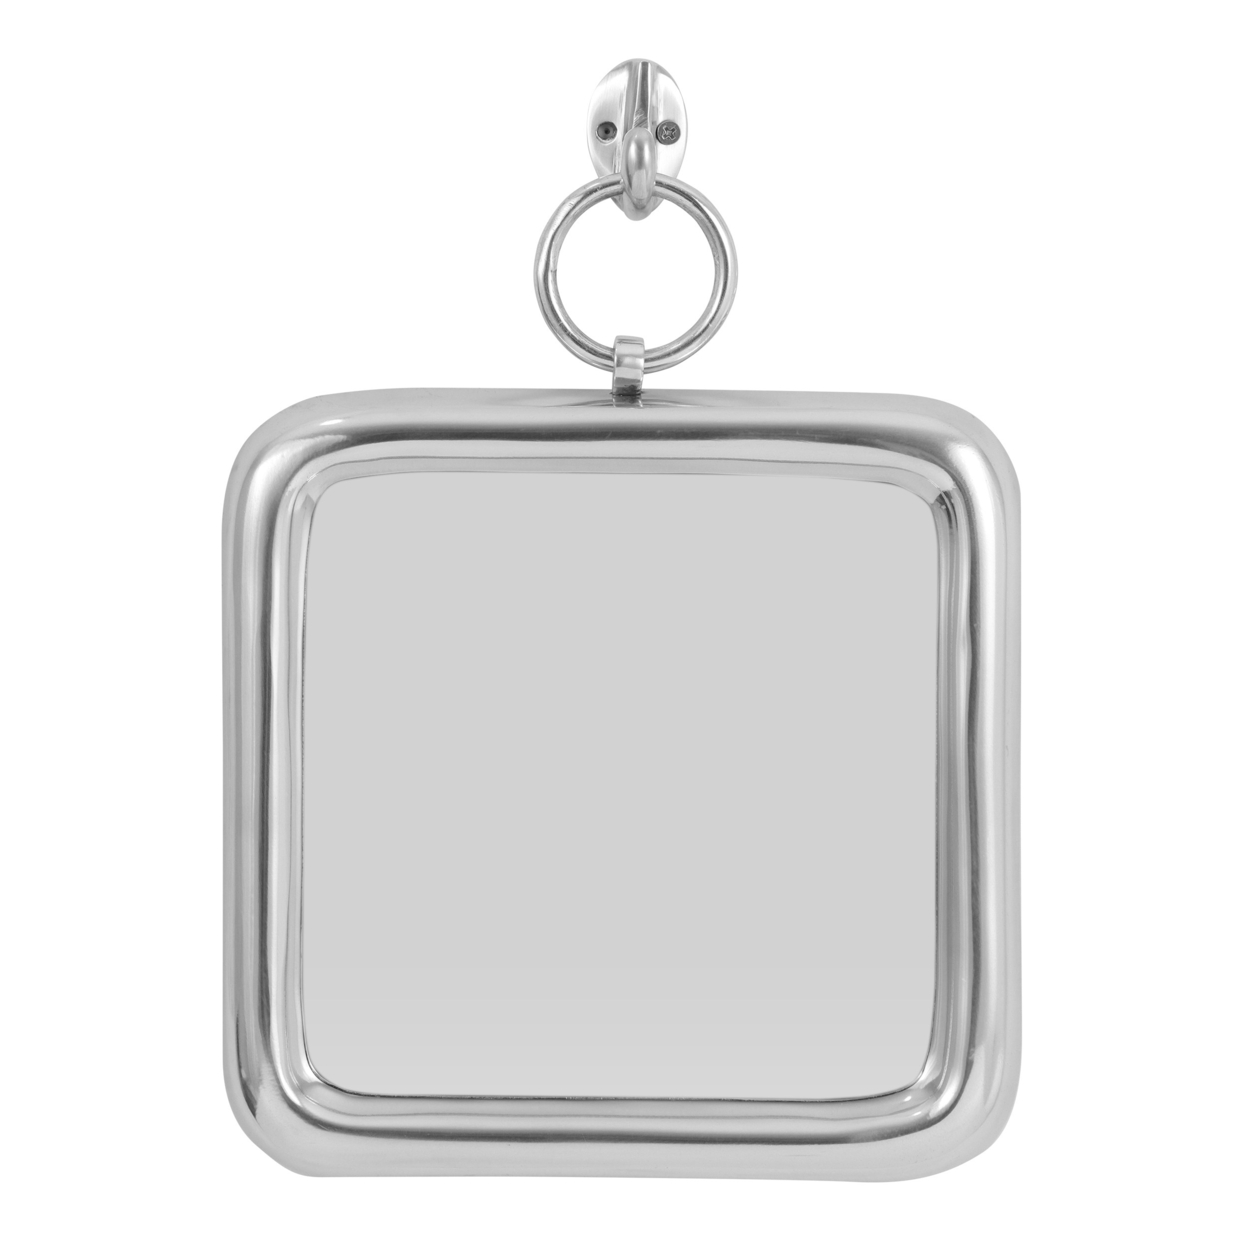 Klein Modern Handcrafted Square Aluminum Wall Mirror, Silver